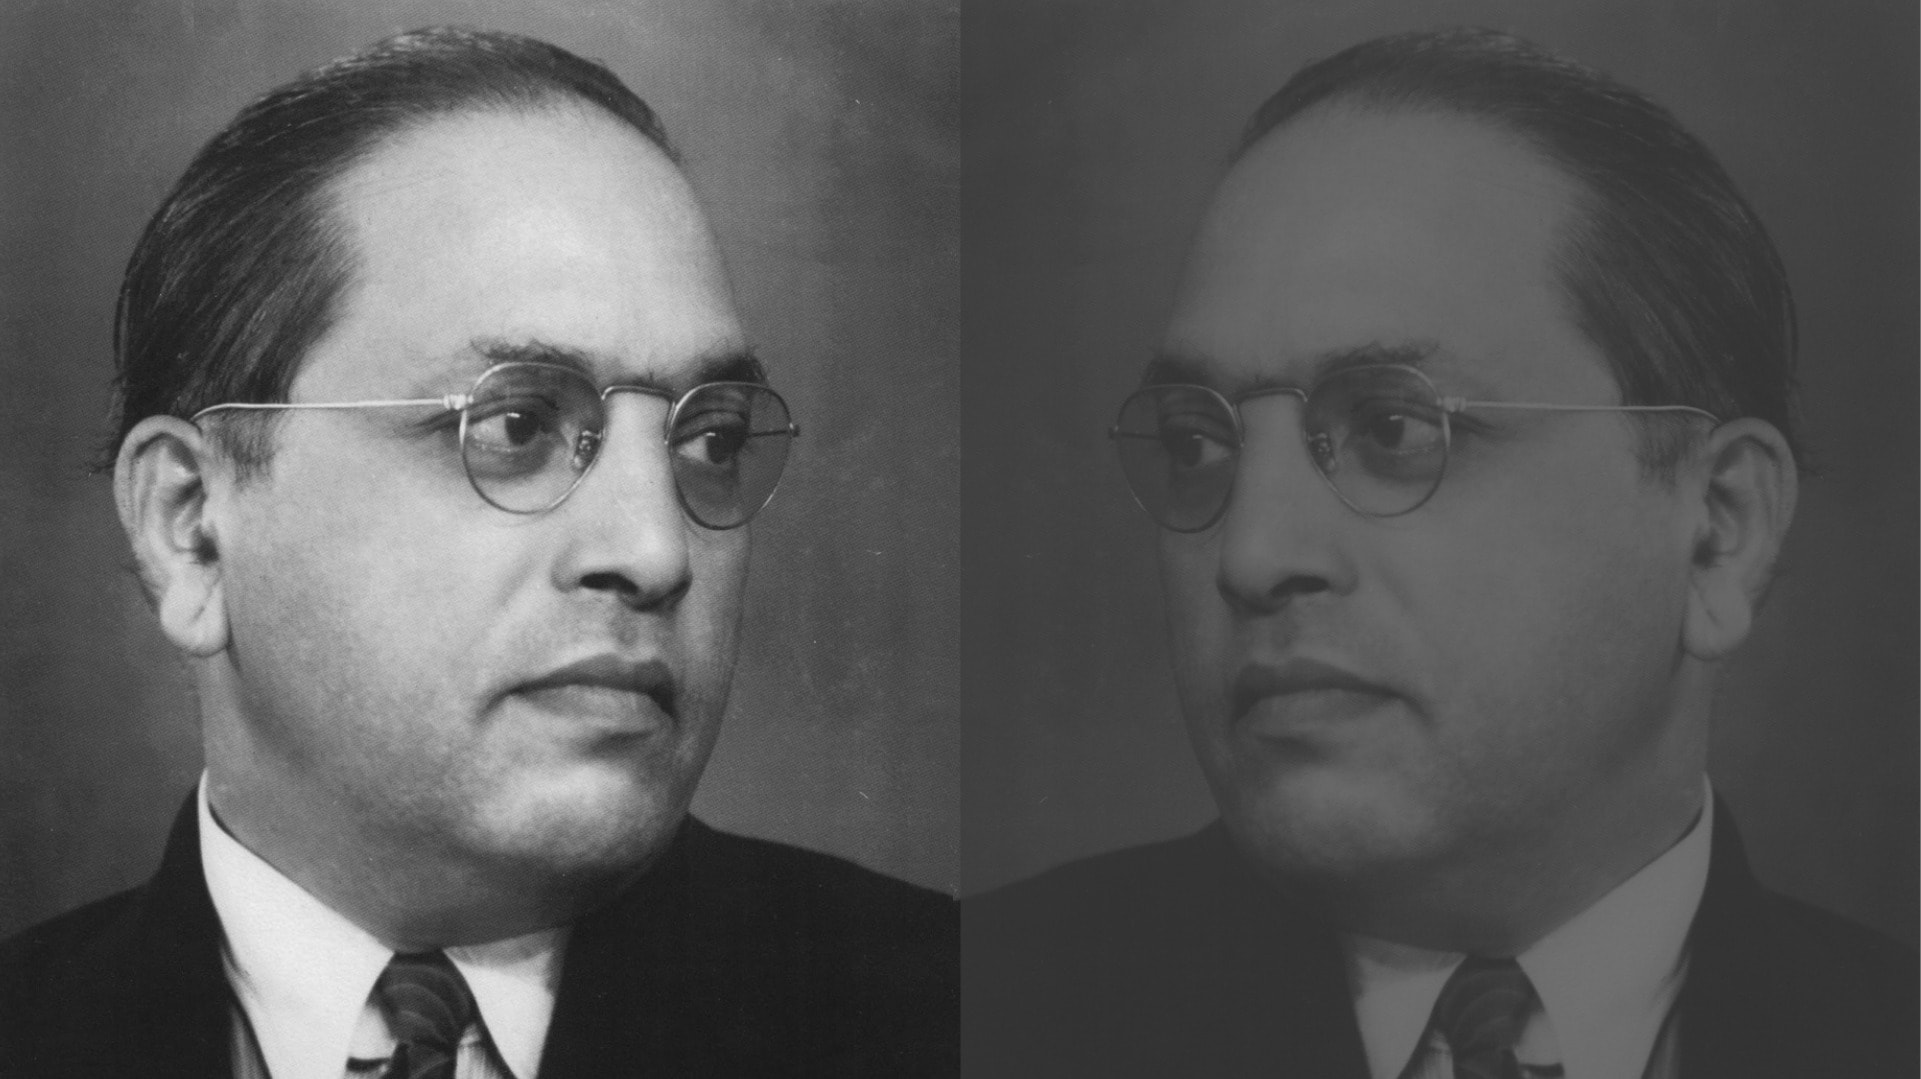 Viewing Article 370 abrogation through the lens of Ambedkar — and Ambedkarites